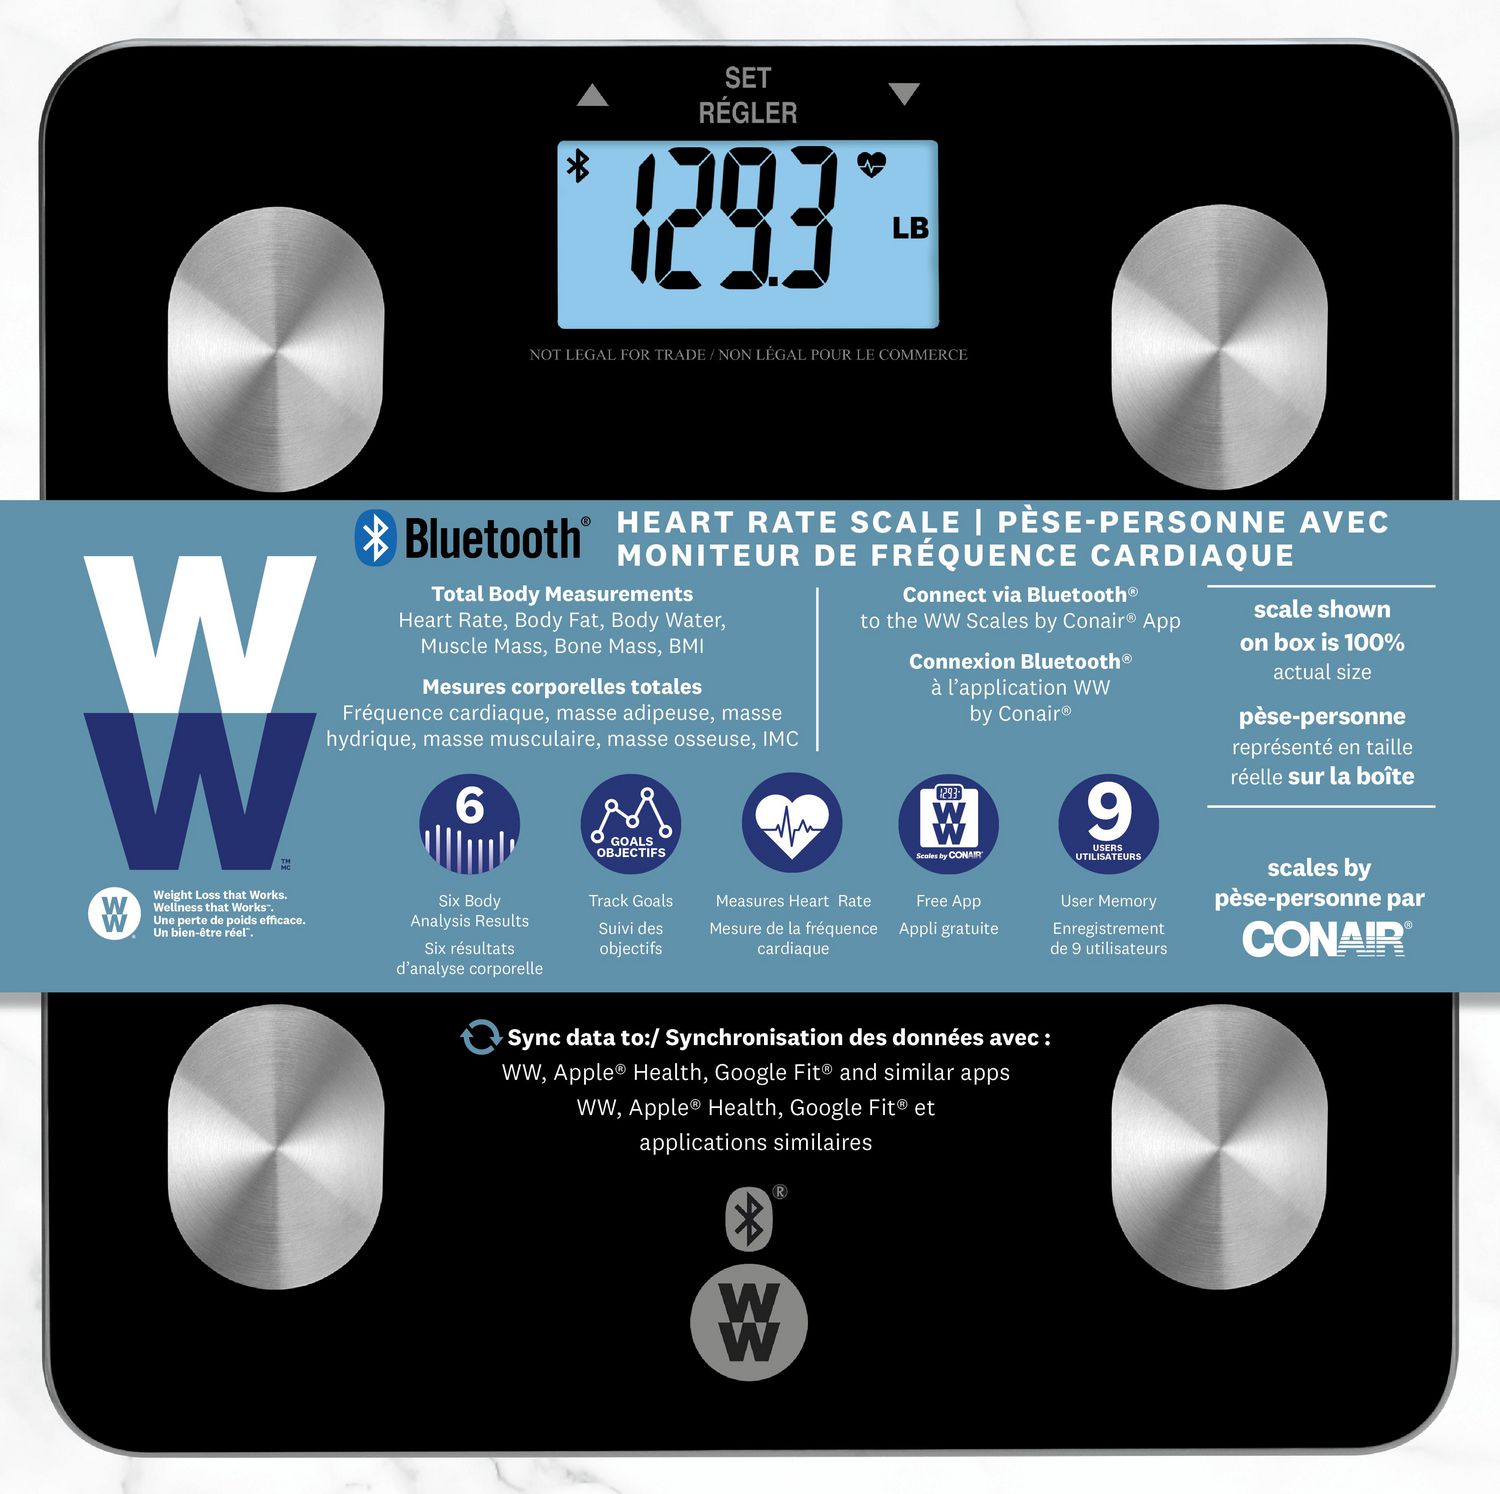 Bluetooth Heart Rate Scale